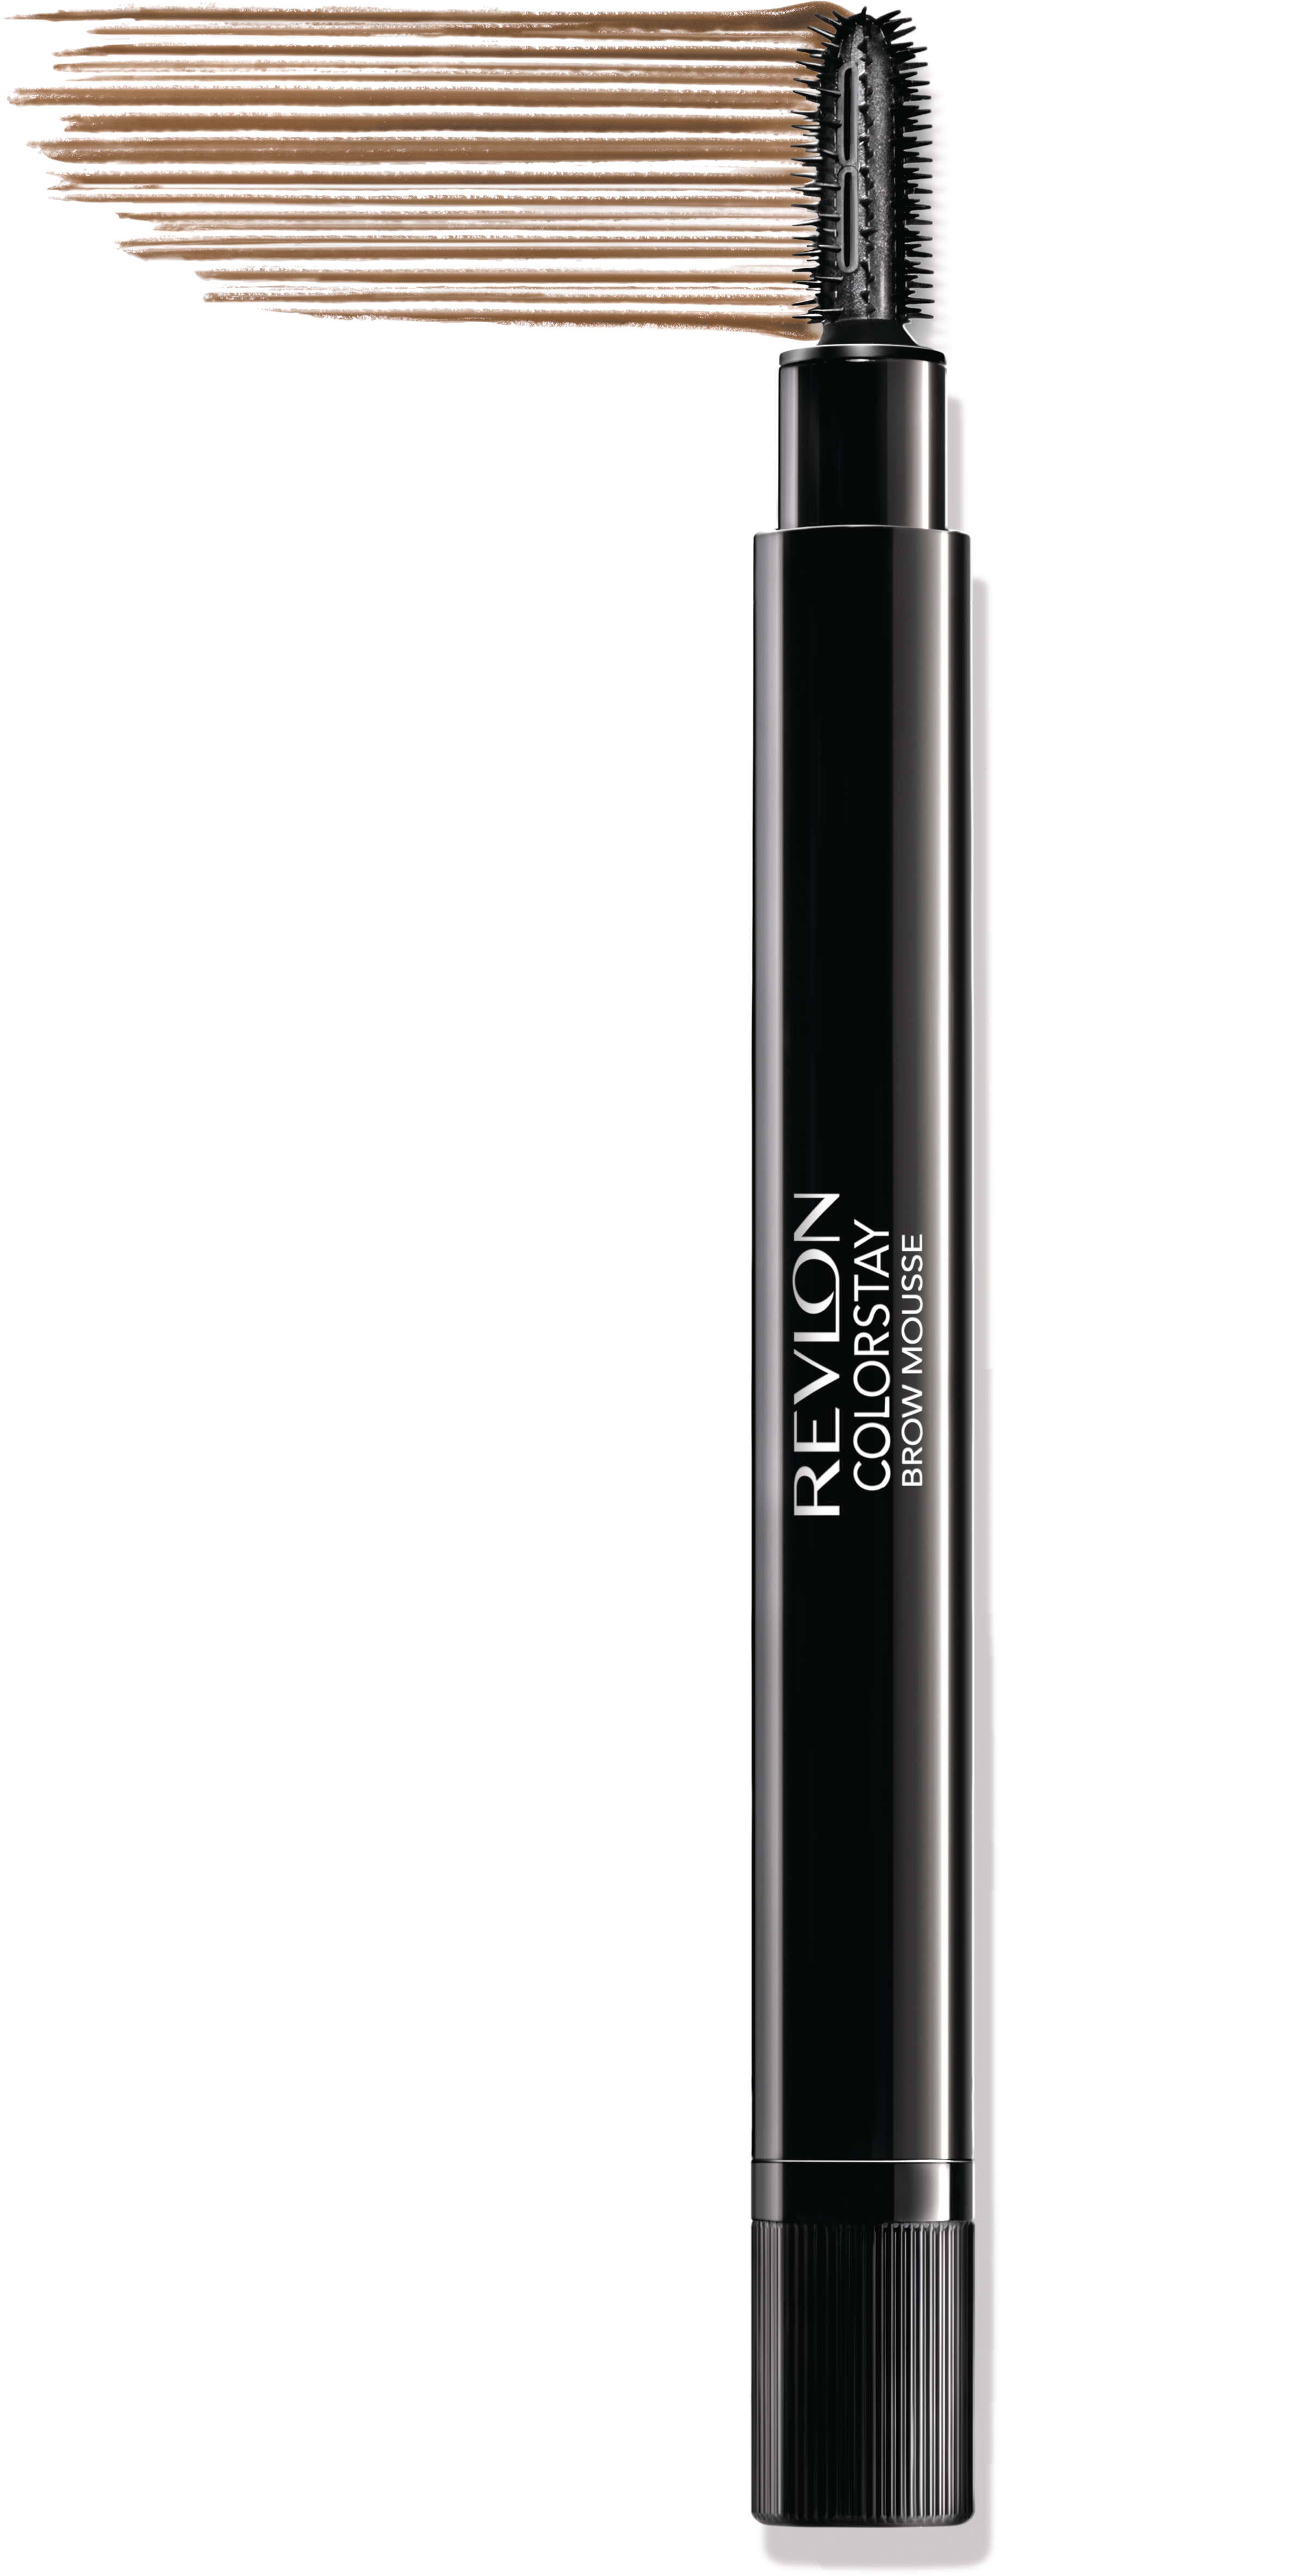 Revlon Colorstay Brow Mousse Soft Brown - image 1 of 4